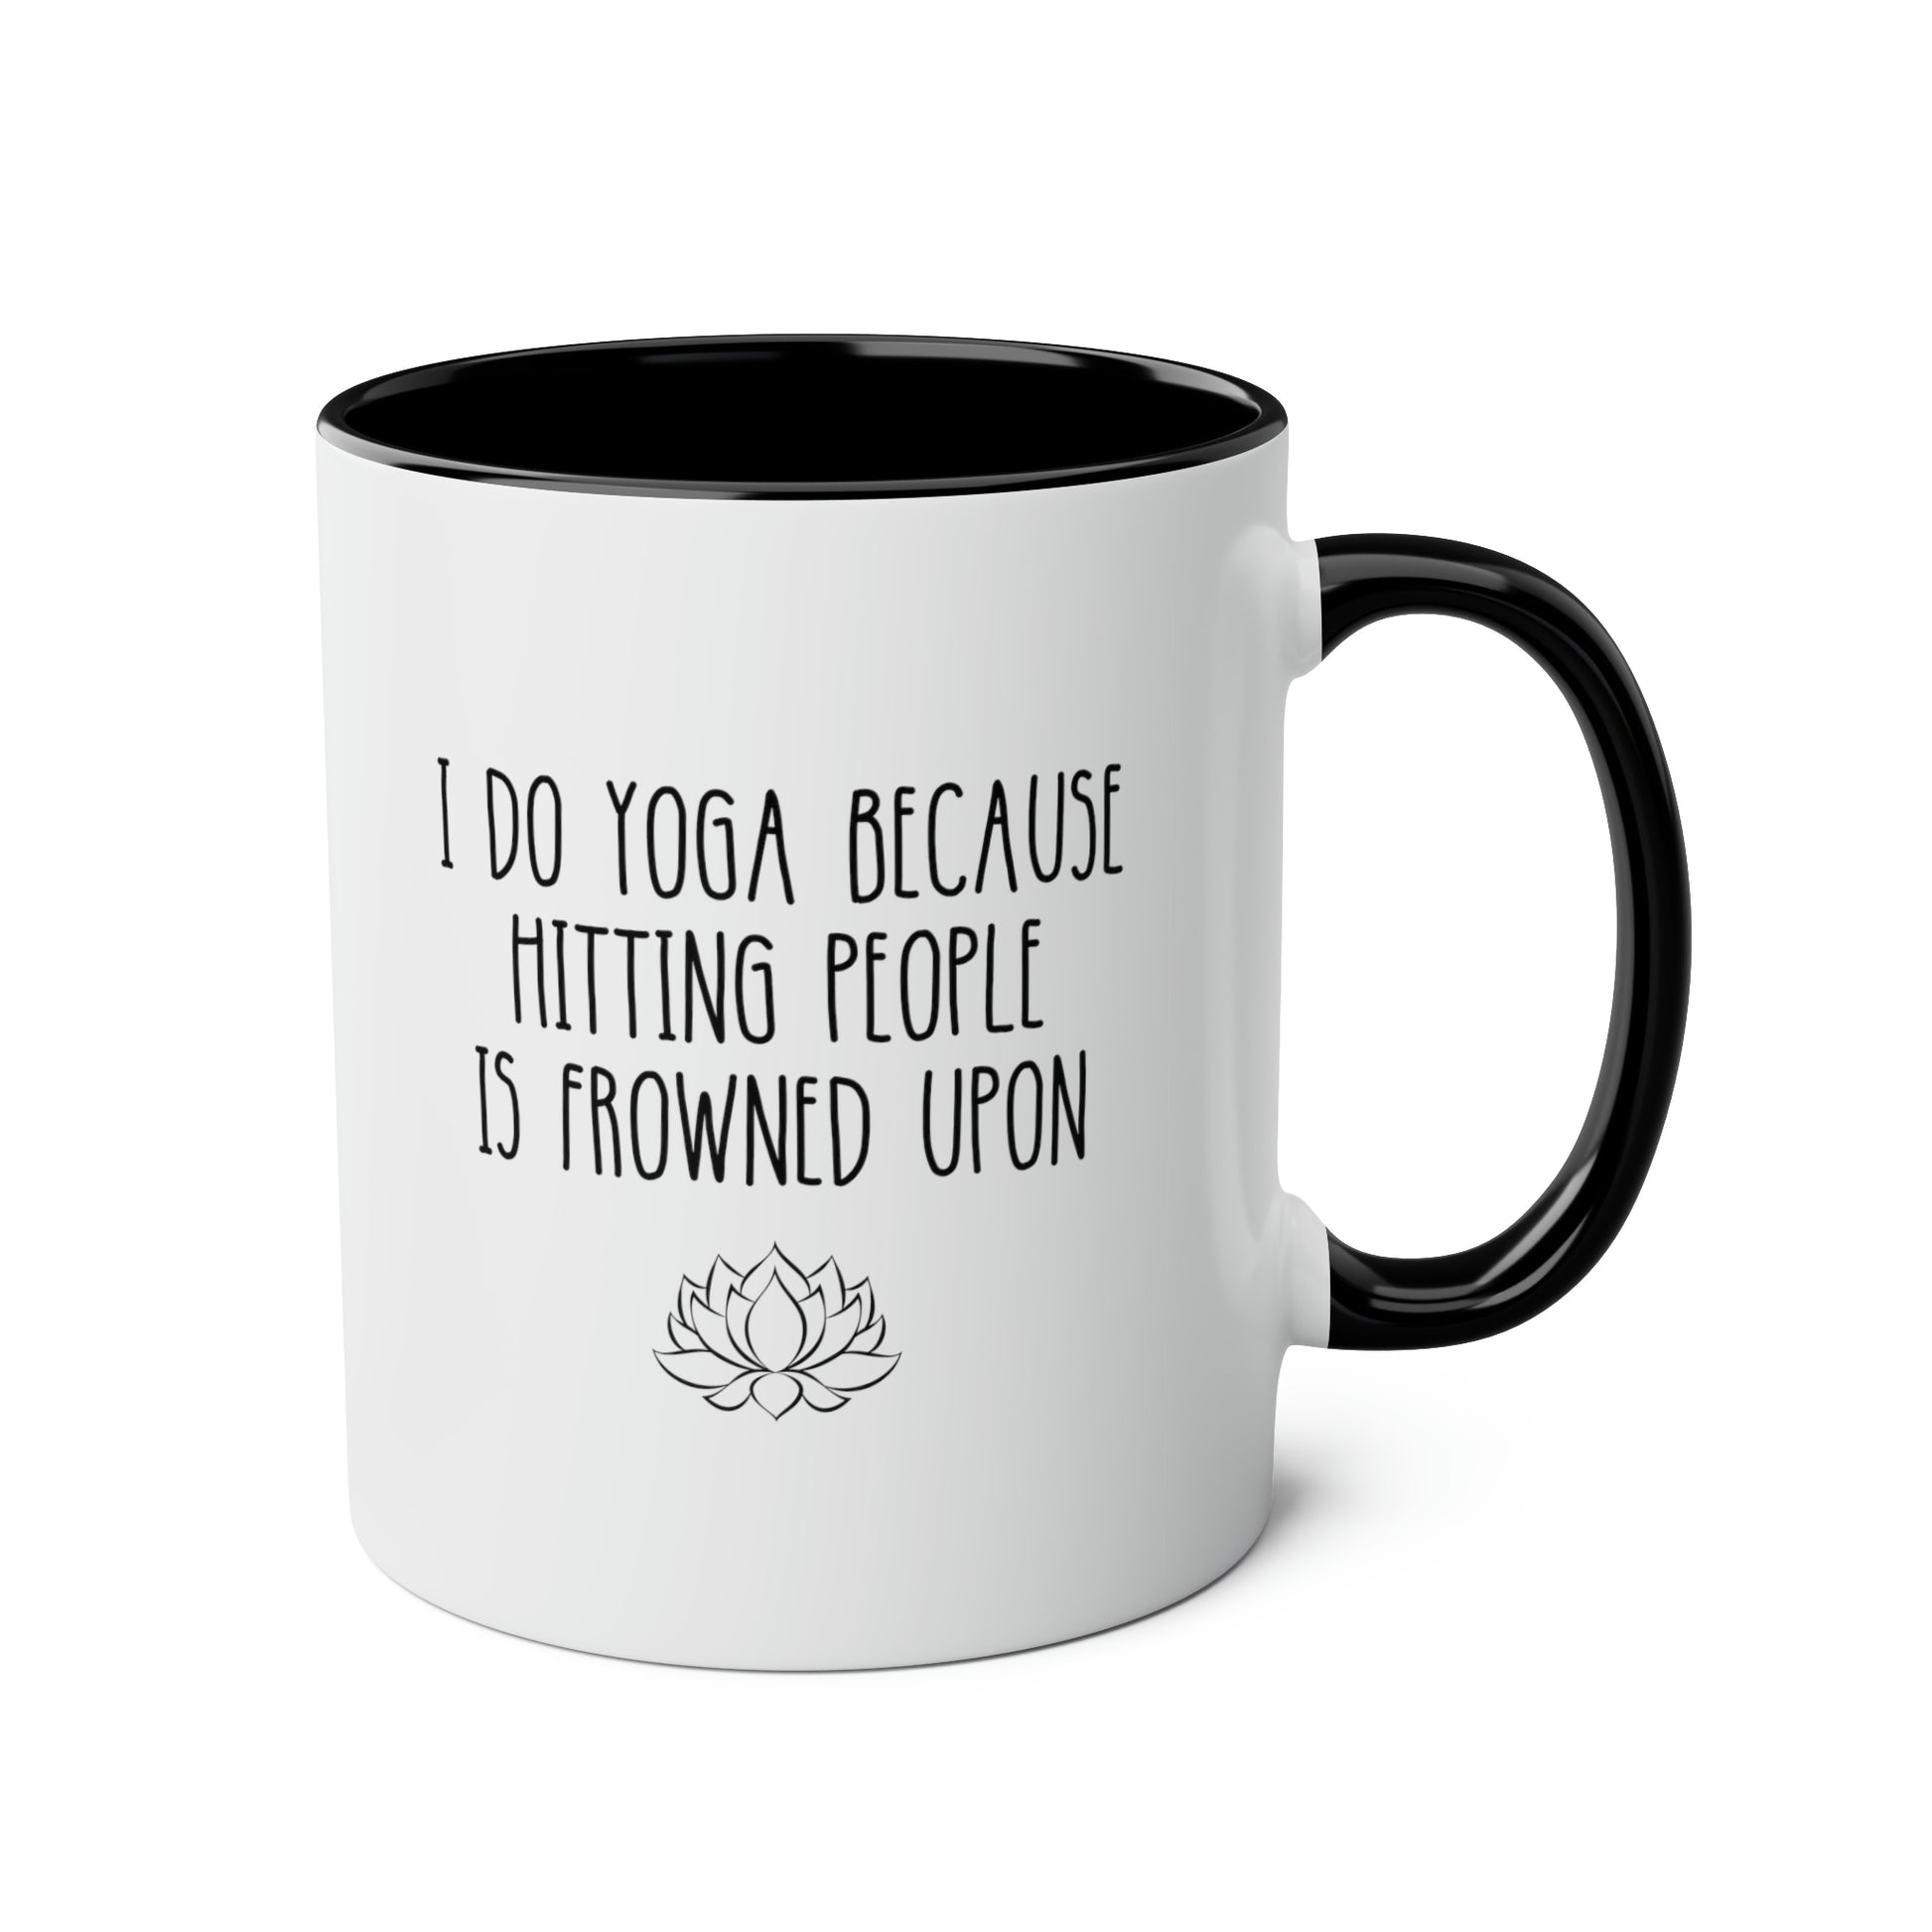 I Do Yoga Because Hitting People Is Frowned Upon 11oz white with black accent funny large coffee mug gift for yogi yogini yoga lover instructor waveywares wavey wares wavywares wavy wares